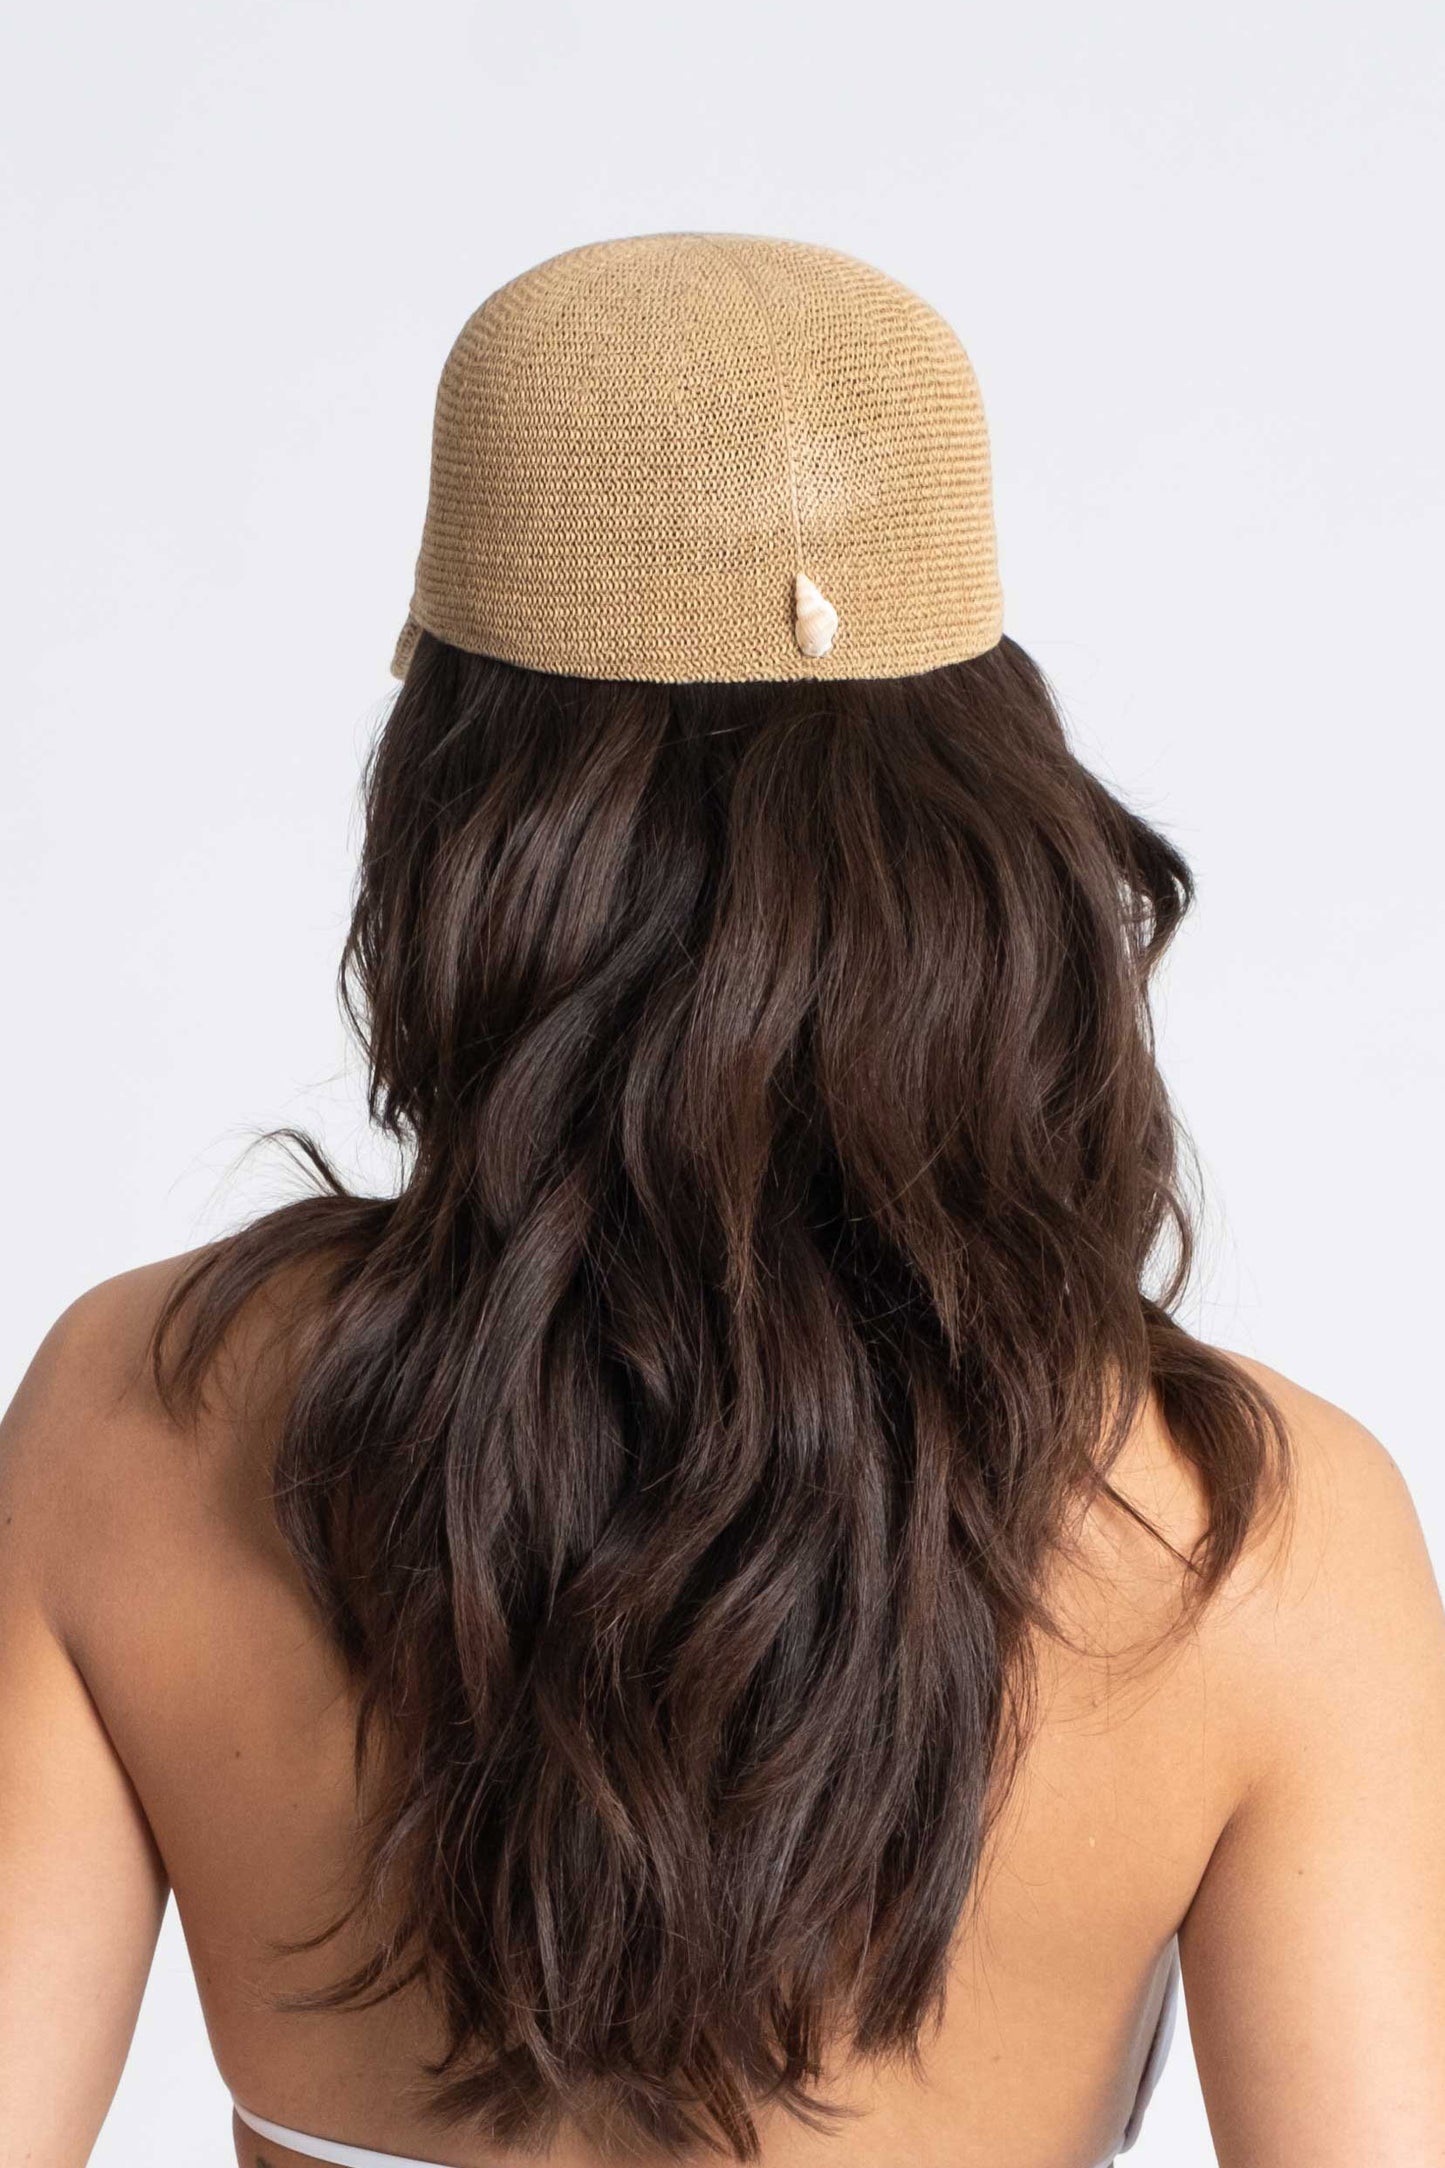 camel straw cap with natural shell.